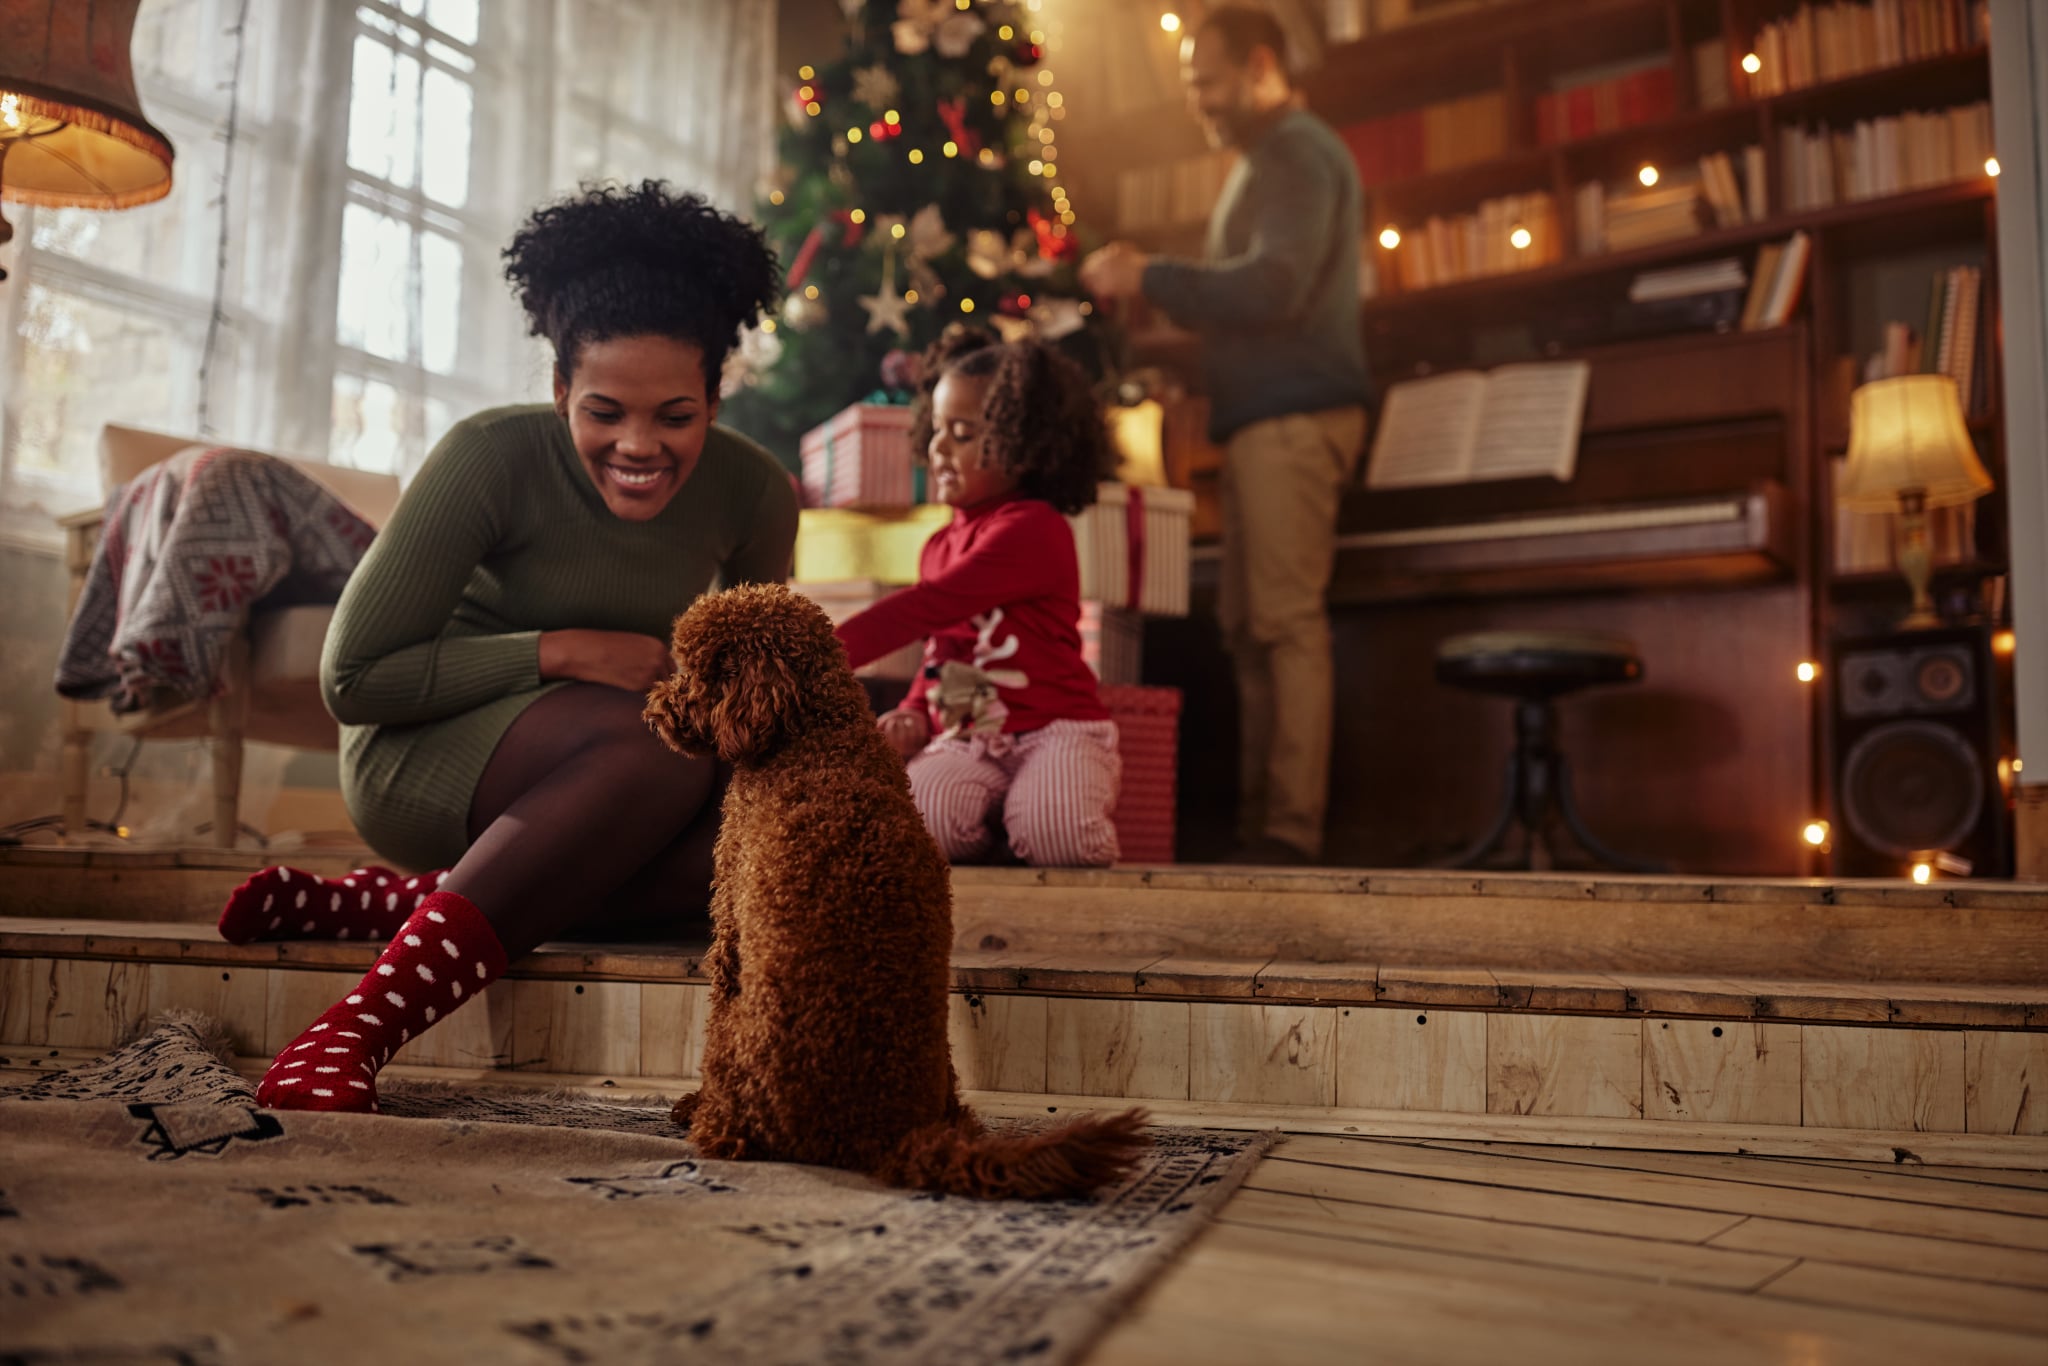 Black woman sitting on the floor and playing with puppy while her daughter unwrapping gifts and husband decorating Christmas tree behind